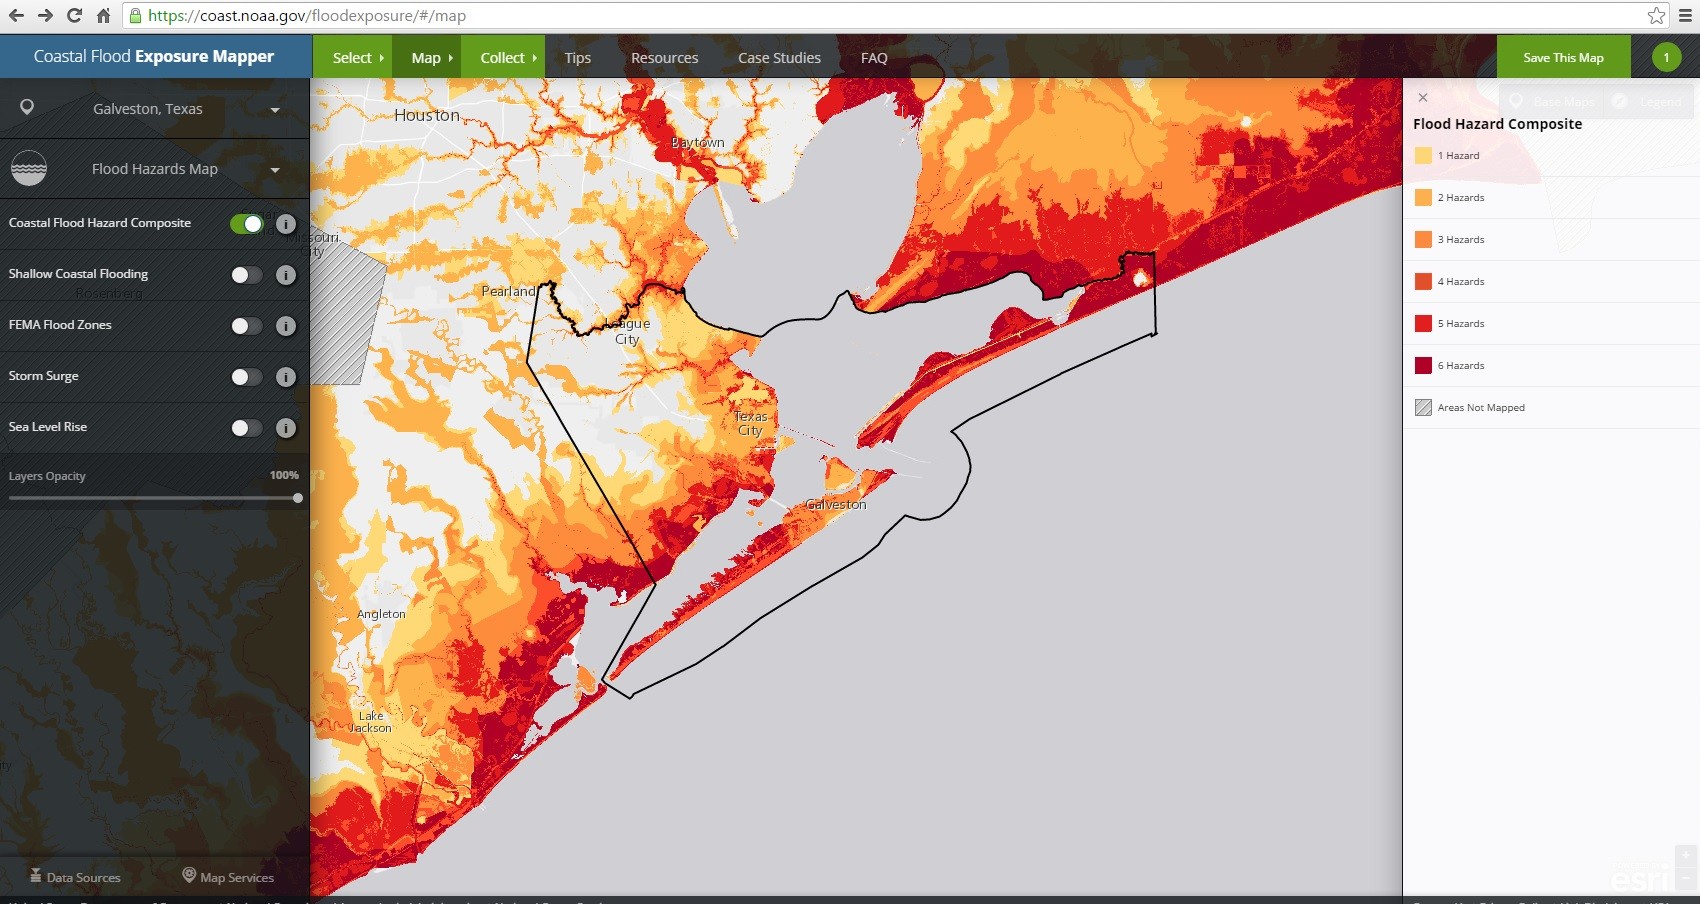 Shades of color from white to red indicate coastal flood hazard in Galveston County, Texas